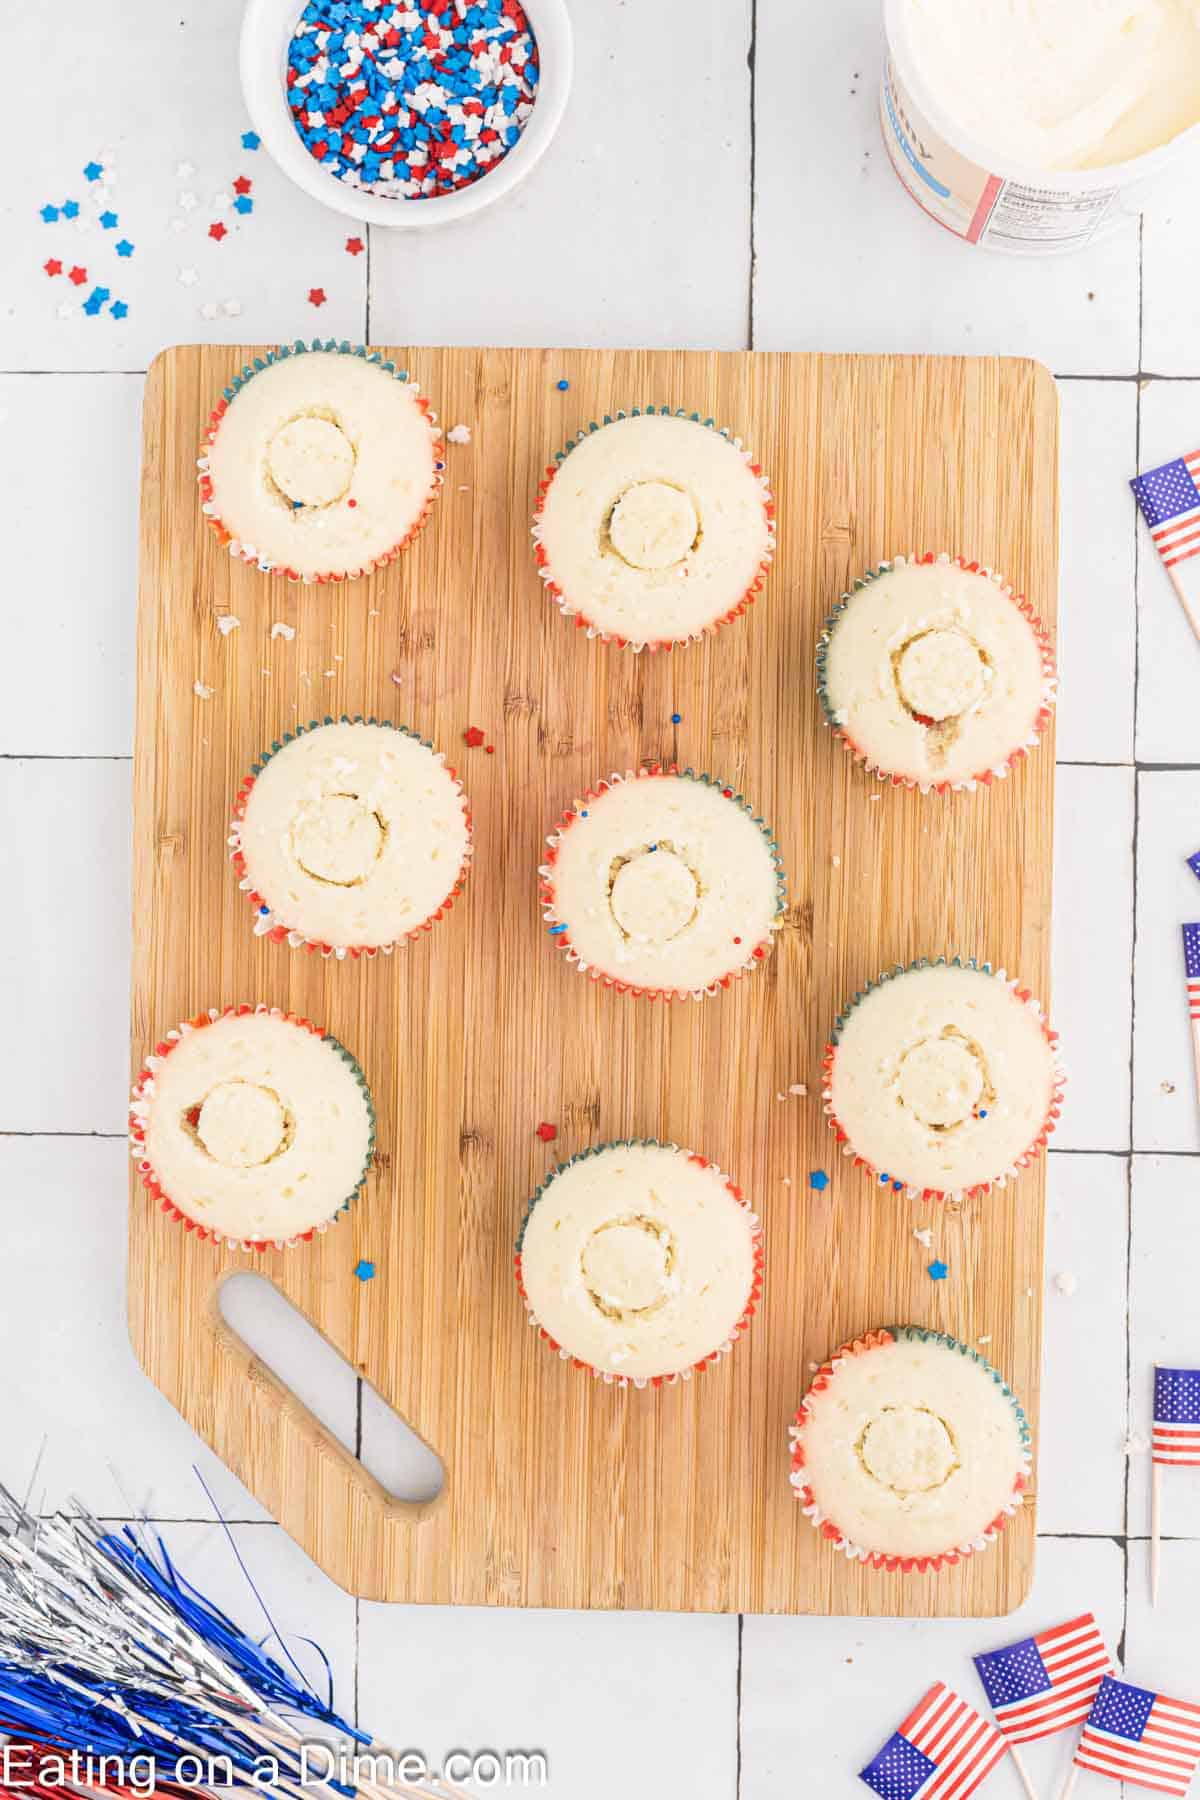 A wooden cutting board holds nine Firecracker Cupcakes with patriotic red, white, and blue sprinkles. A bowl of sprinkles, a container of frosting, and small American flag decorations are nearby, creating a festive atmosphere. The website “Eating on a Dime” is partially visible.